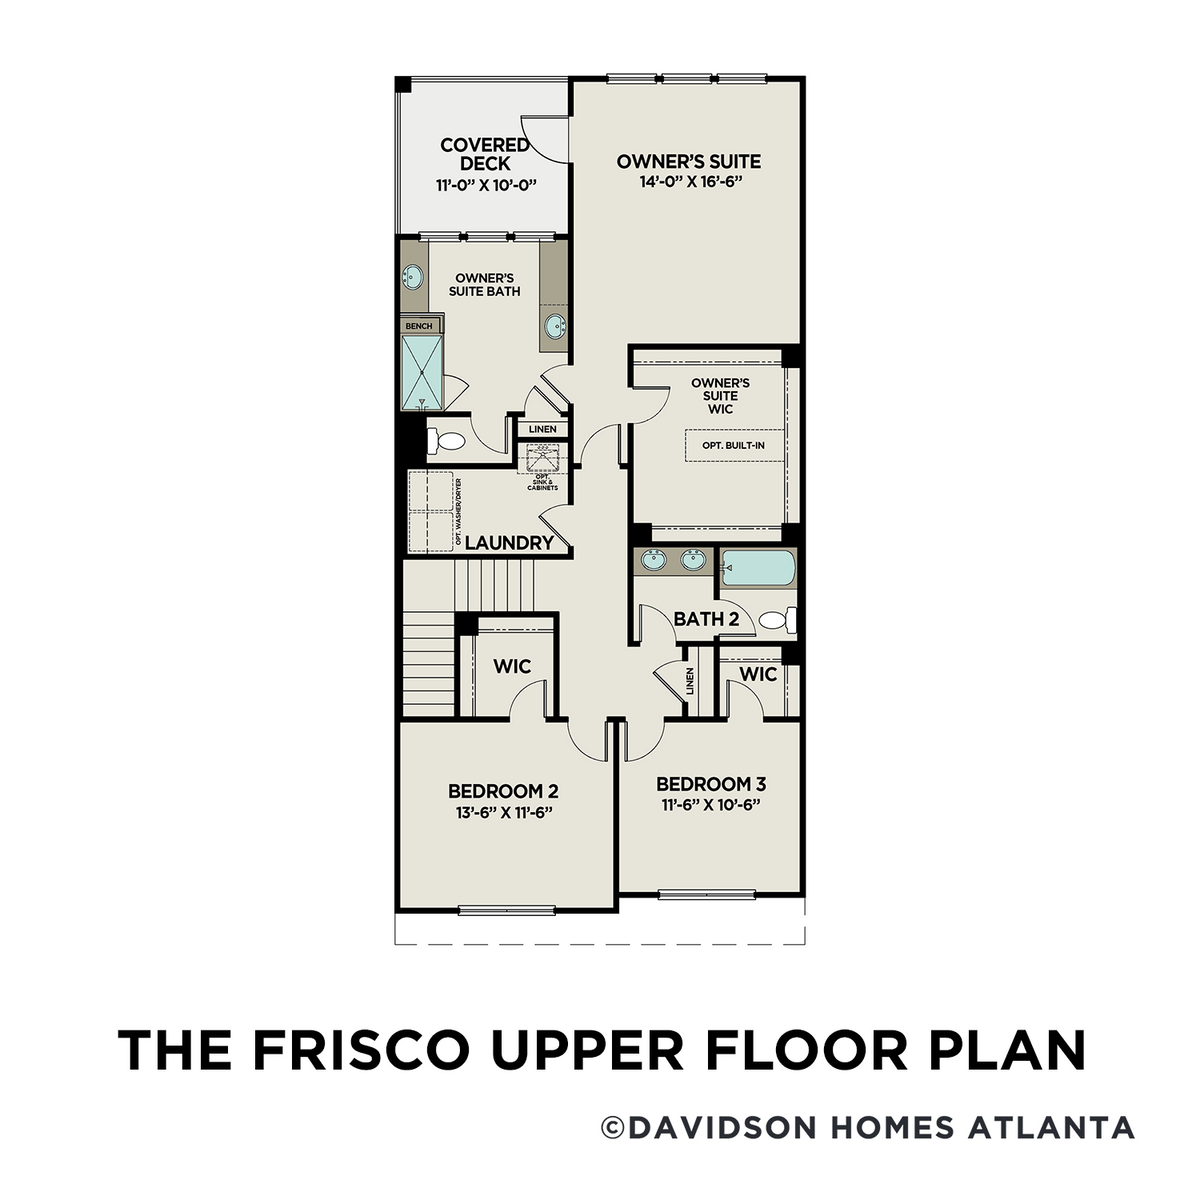 2 - The Frisco B floor plan layout for 701 Stickley Oak Way in Davidson Homes' The Village at Towne Lake community.